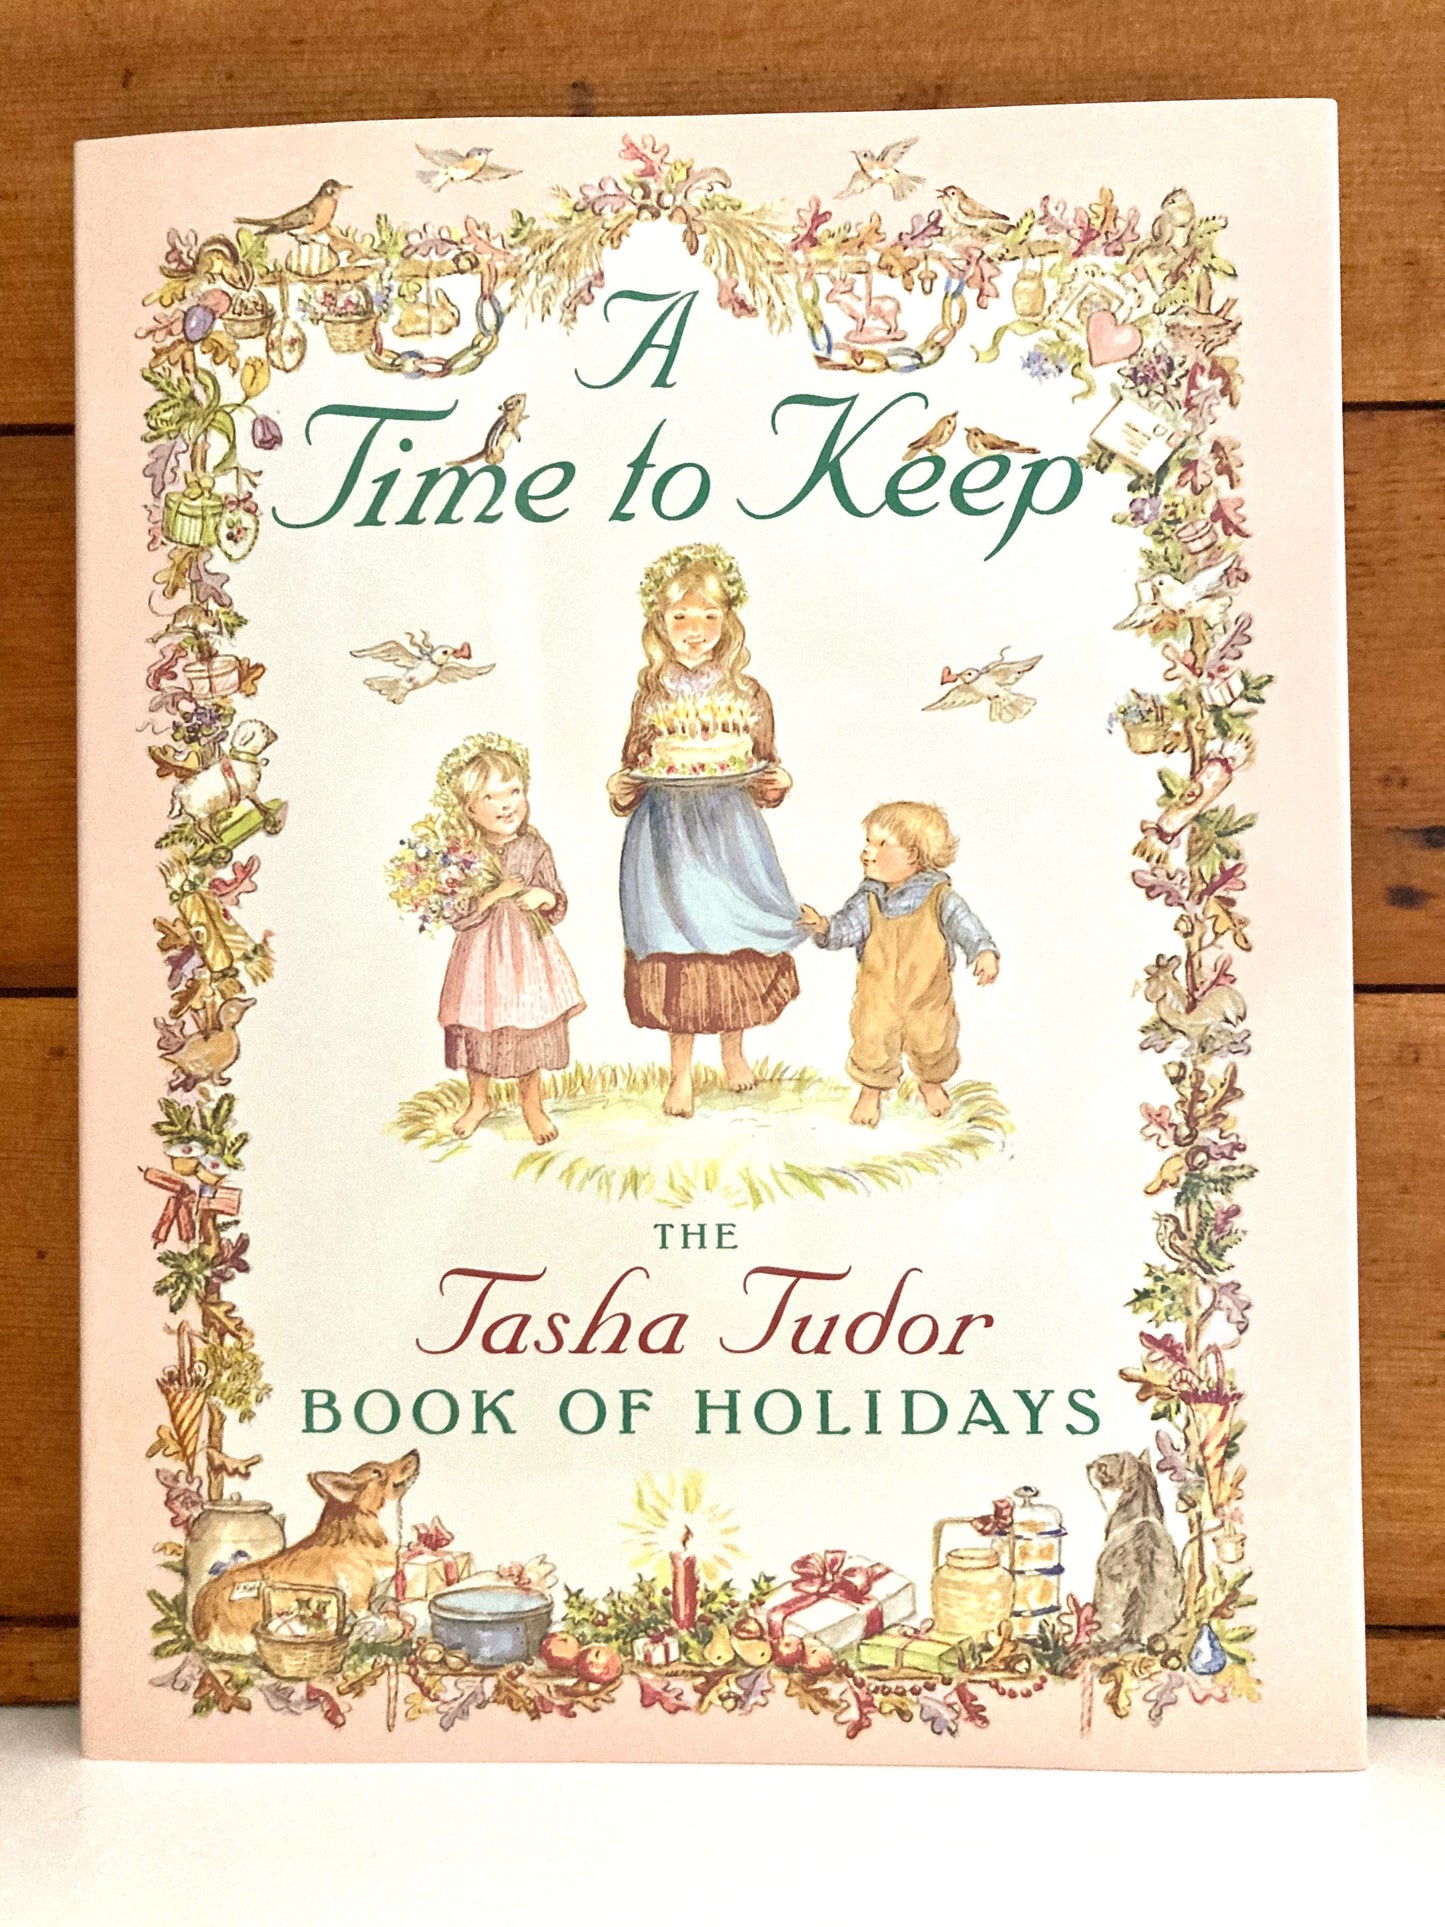 Children's Picture Book - Tasha Tudor's A TIME TO KEEP